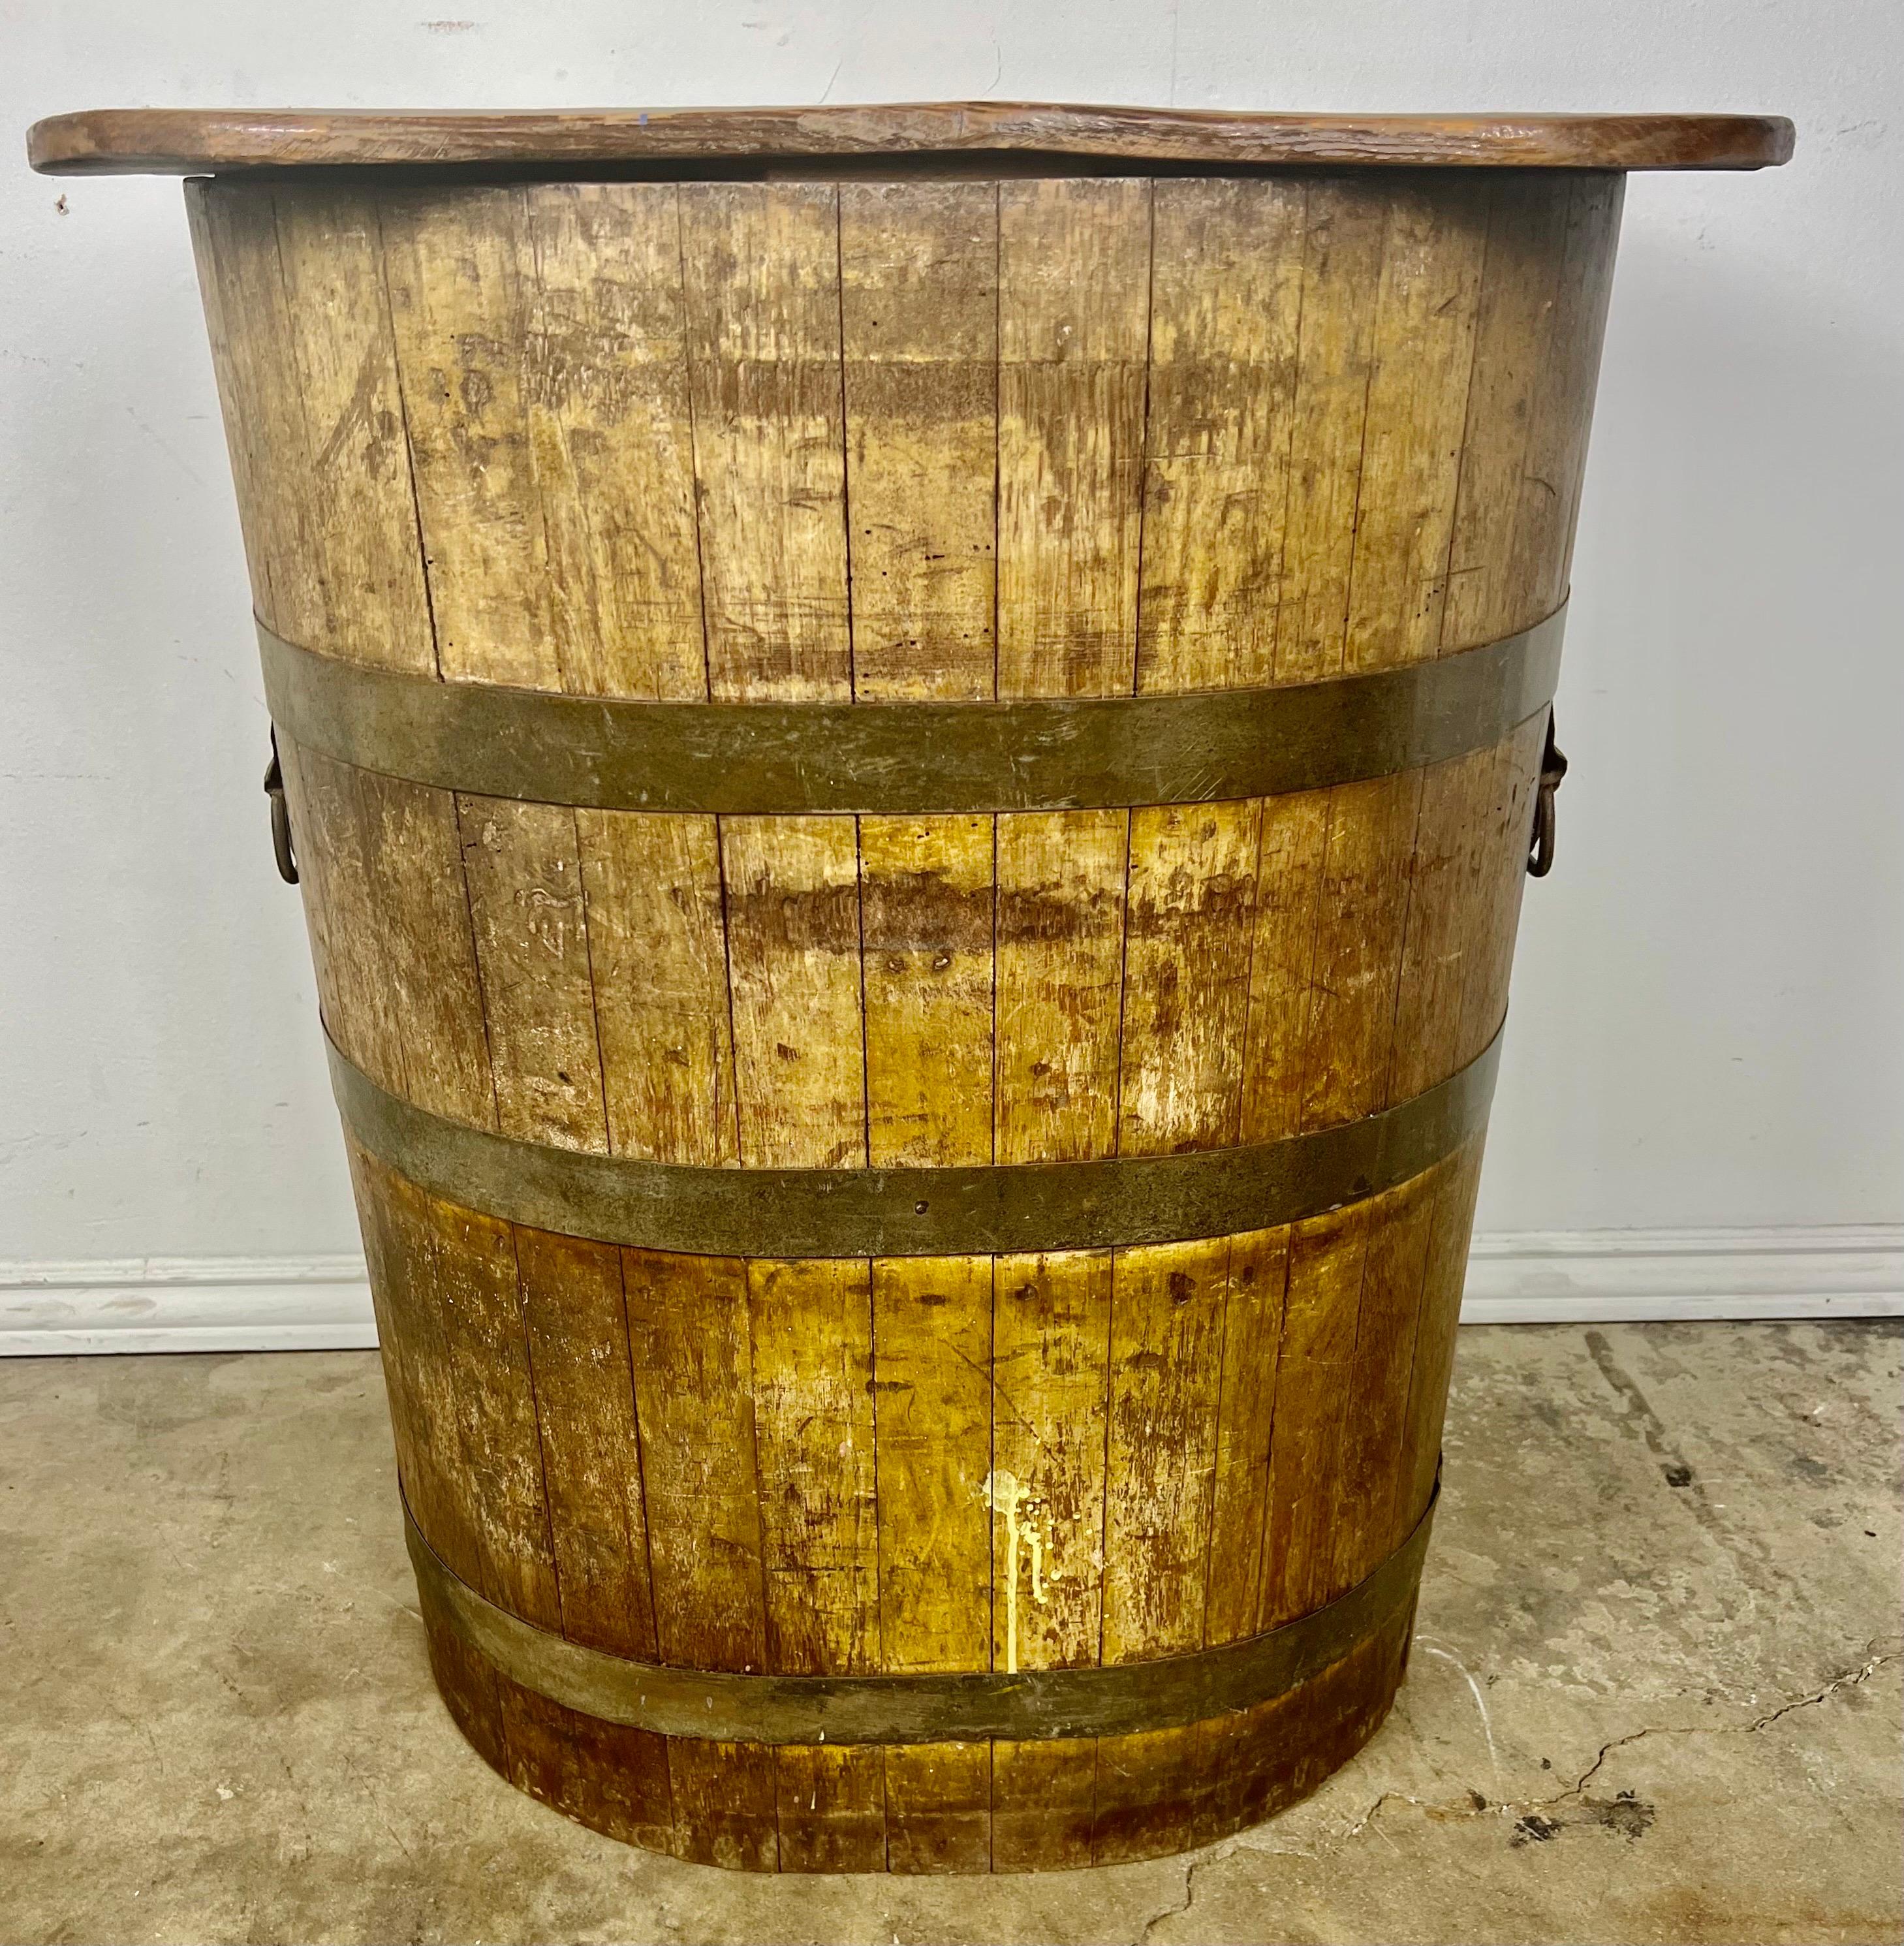 Early 20th century unique Saki Barrel that was converted into a table.  This table would be great between a pair of leather club chairs or as a wine tasting table in your new wine room.